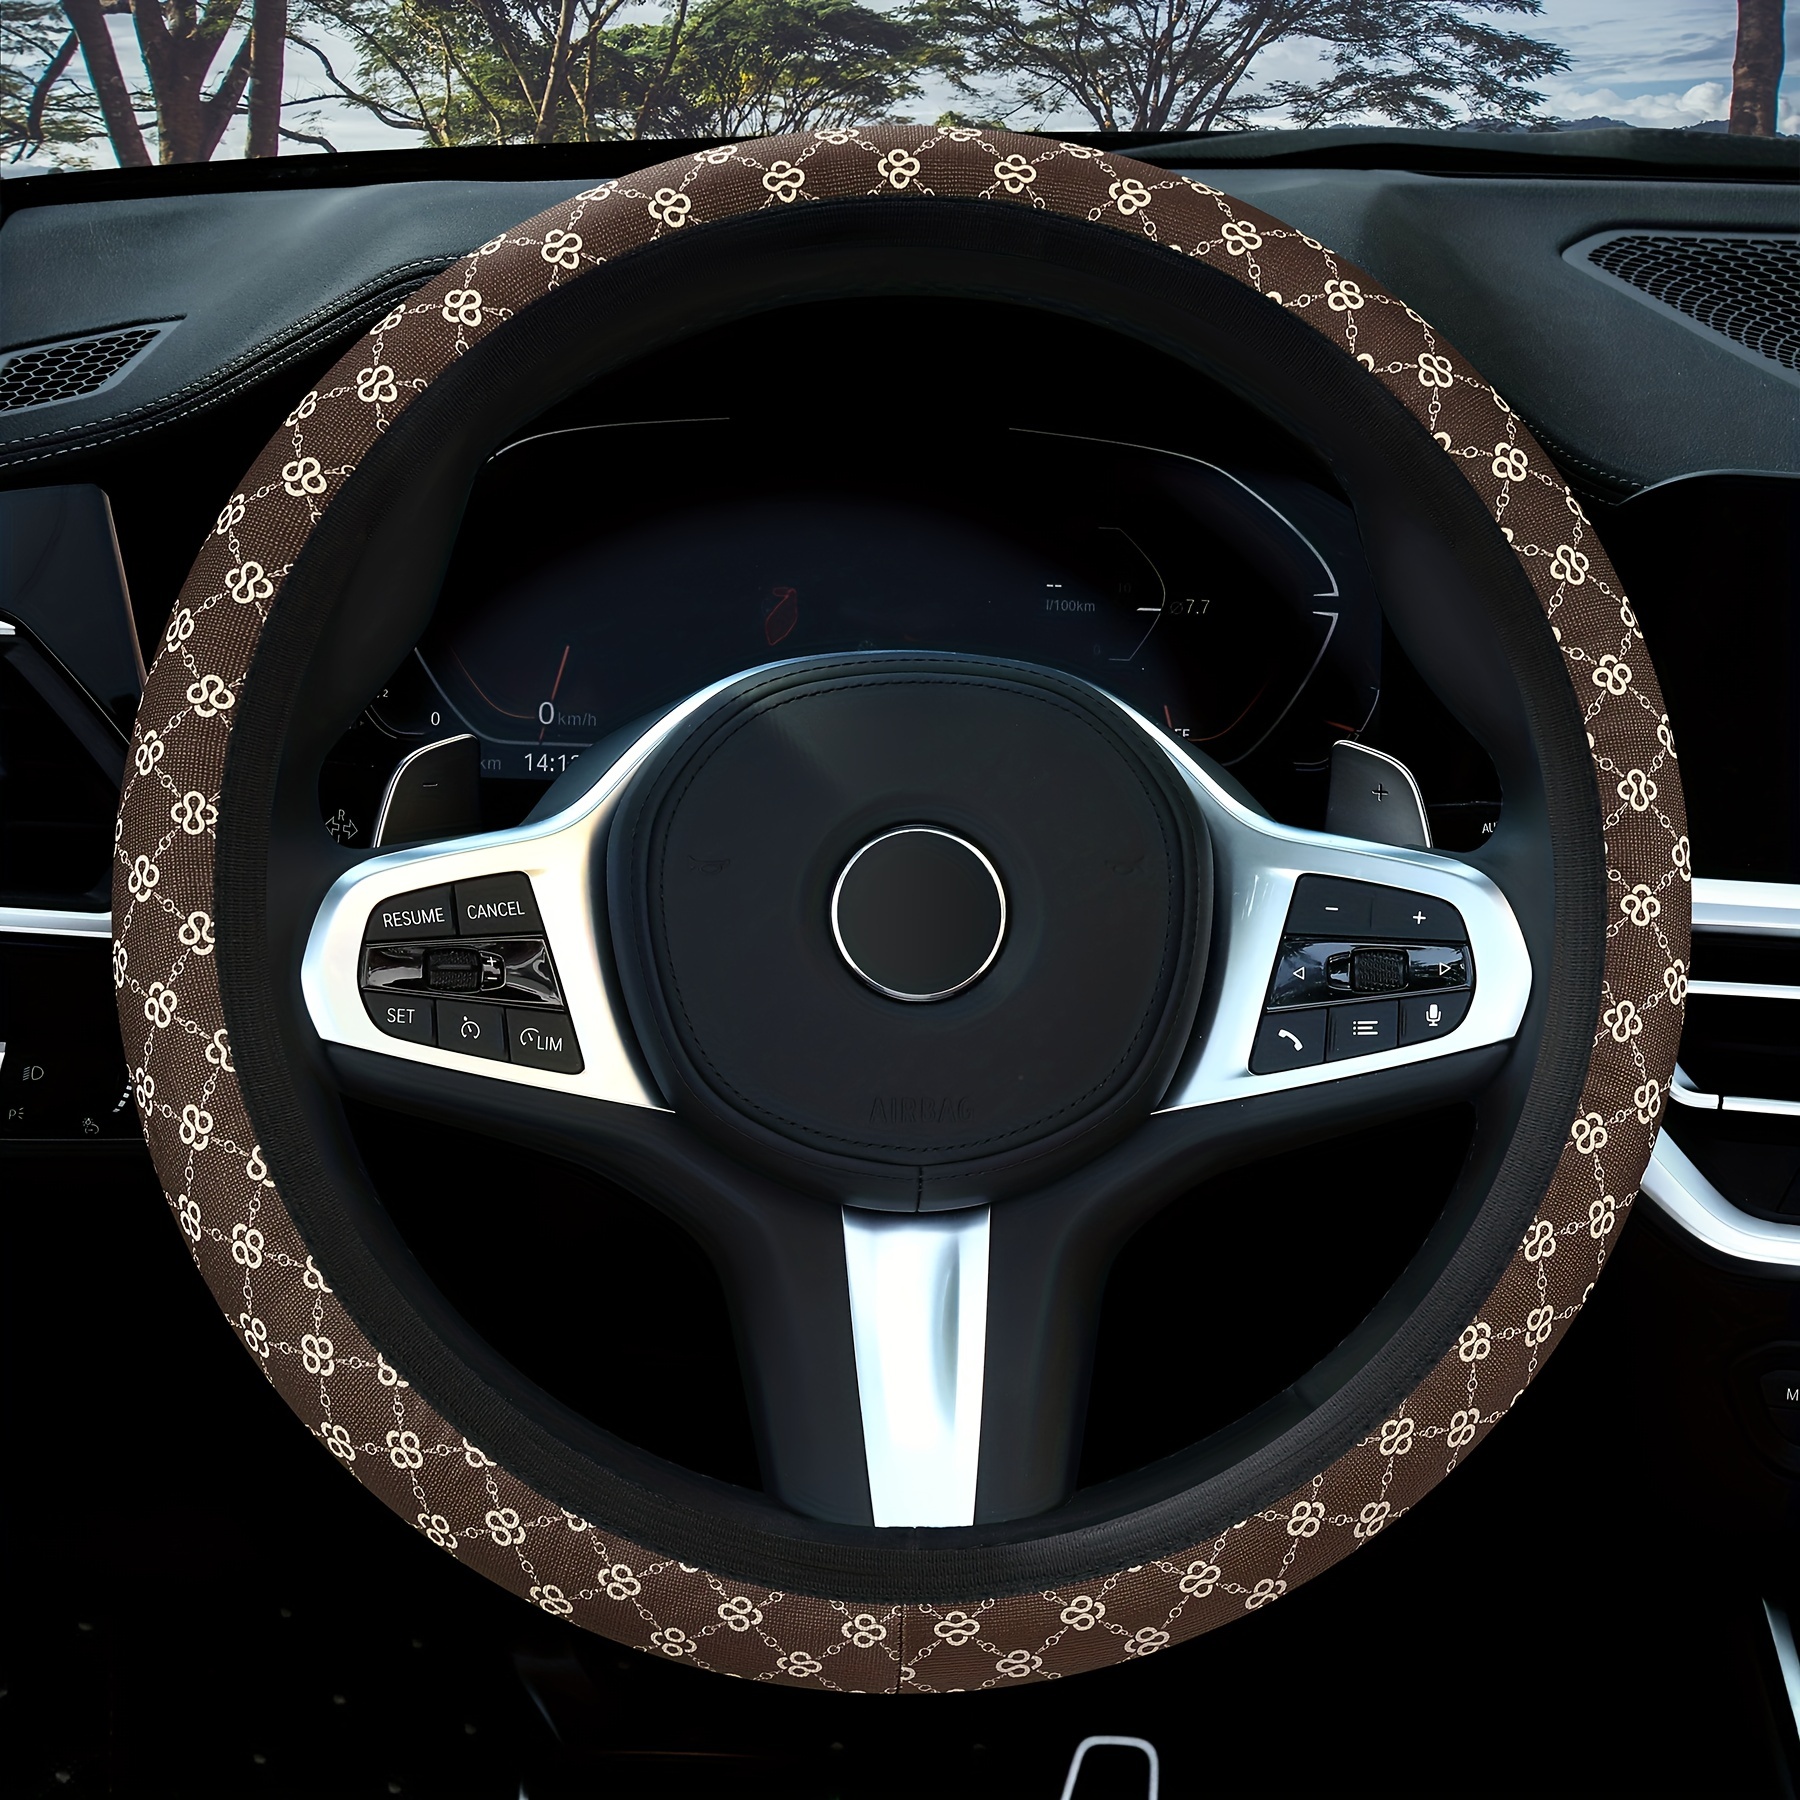 Steering wheel covers: 6 Best Steering Wheel Covers for your Car